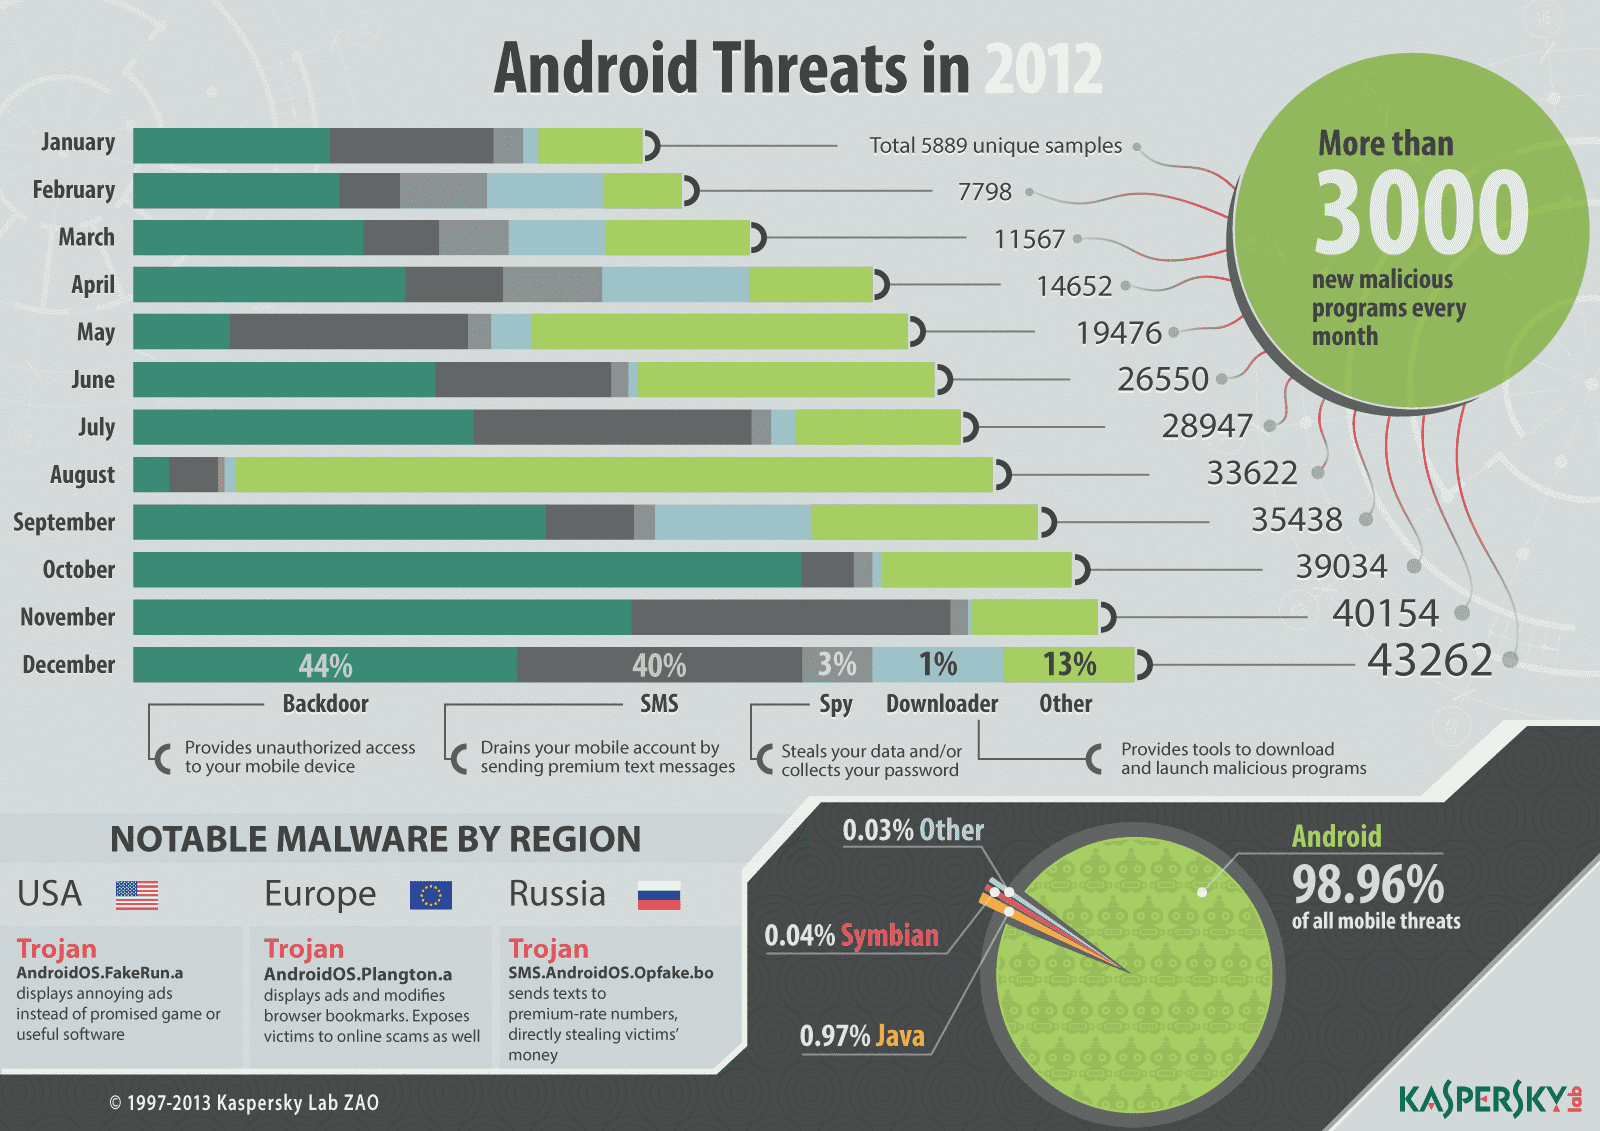 Android Malware Threats 2012 Infographic